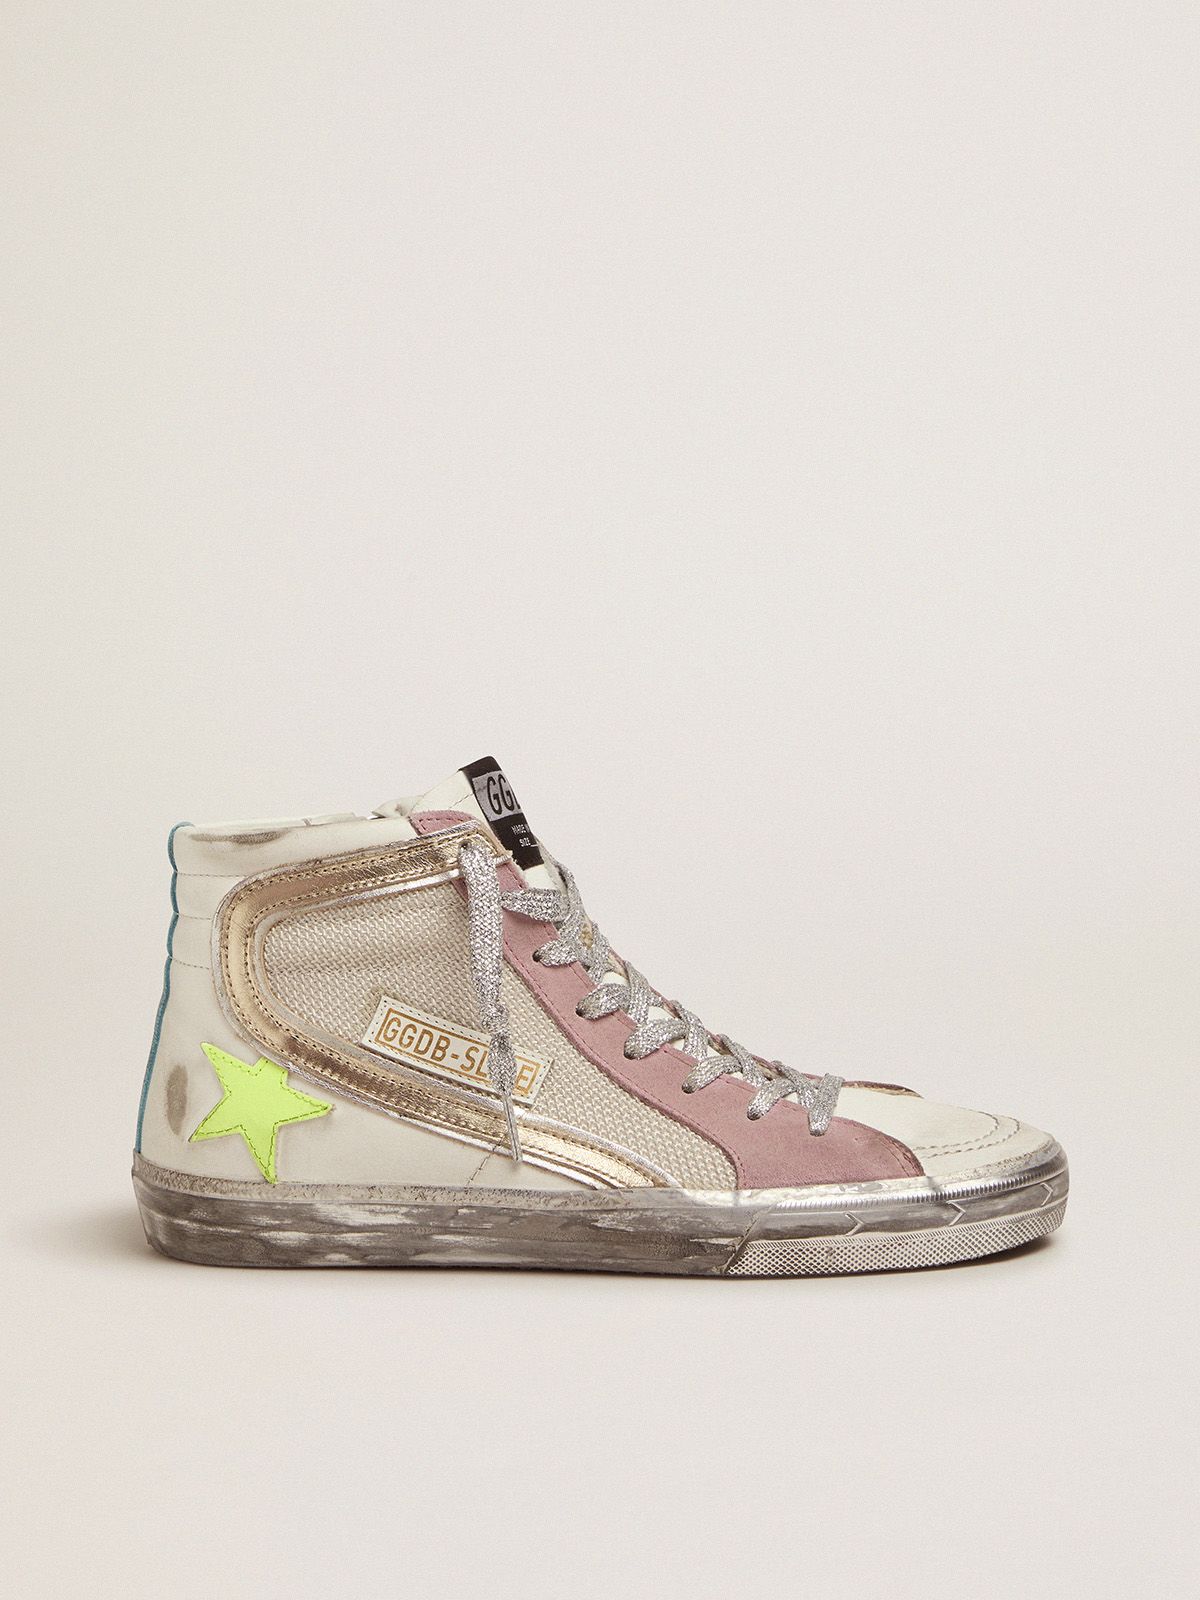 golden goose pink Slide with sneakers white and upper